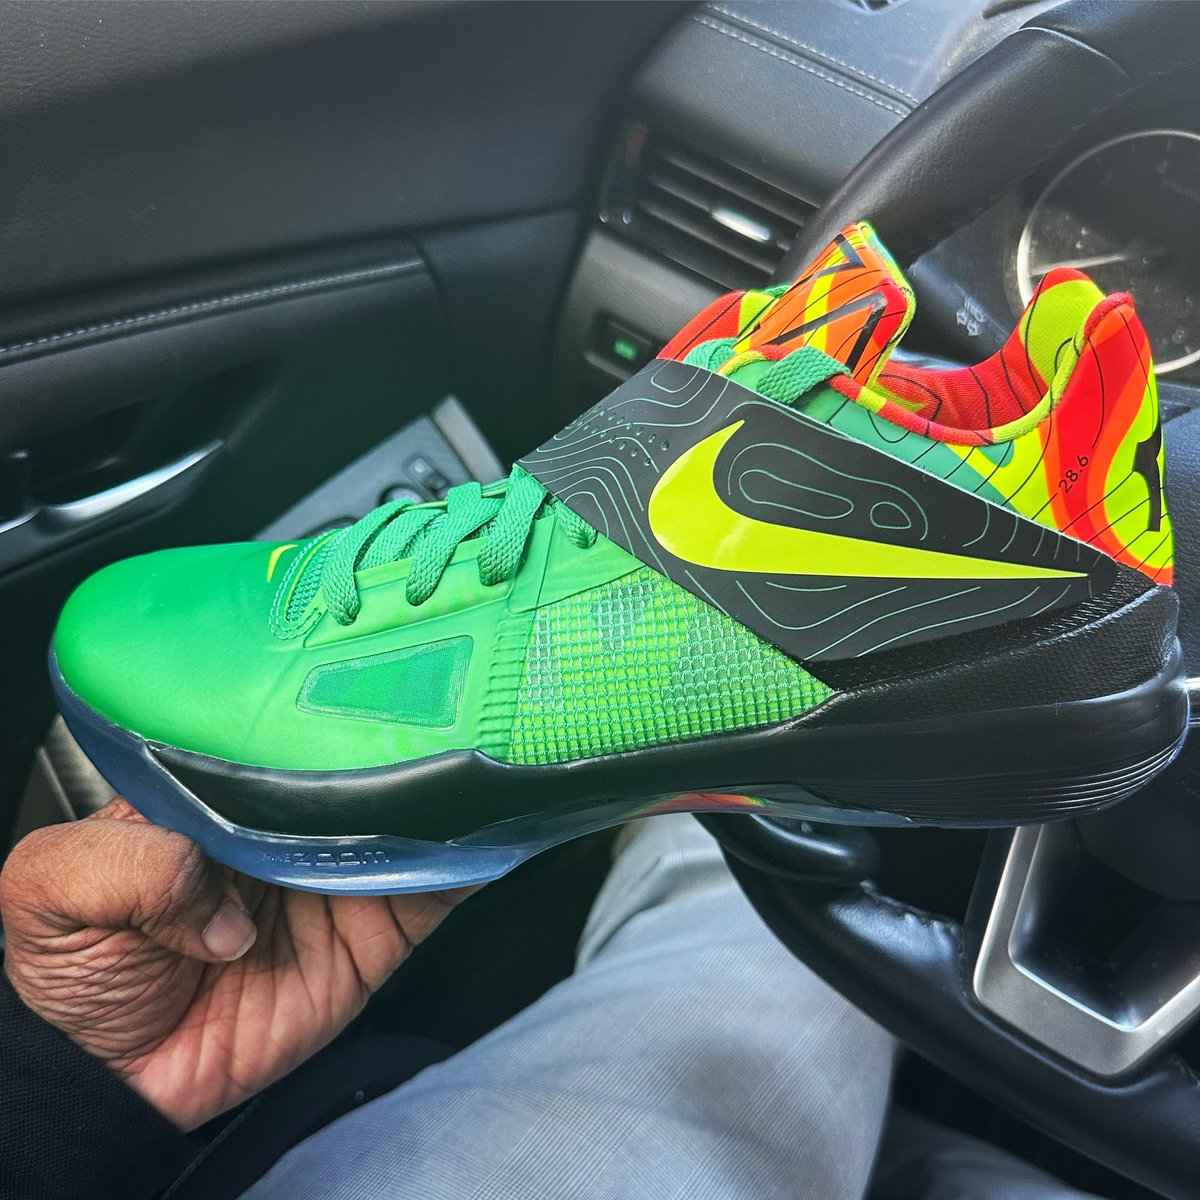 2011 me is loving life right now! Believe me, you just had to be there lol. The sneaker game just ain’t the same. Nike KD 4 “Weatherman” #Sneakers #Kicks #KD #SNKRS #WDYWT #WOMFT  #WearYourSneakers #KOTD #WearYourKicks #SNKRSLiveHeatingUp #Sneakerhead #YourSneakersAreDope #Nike